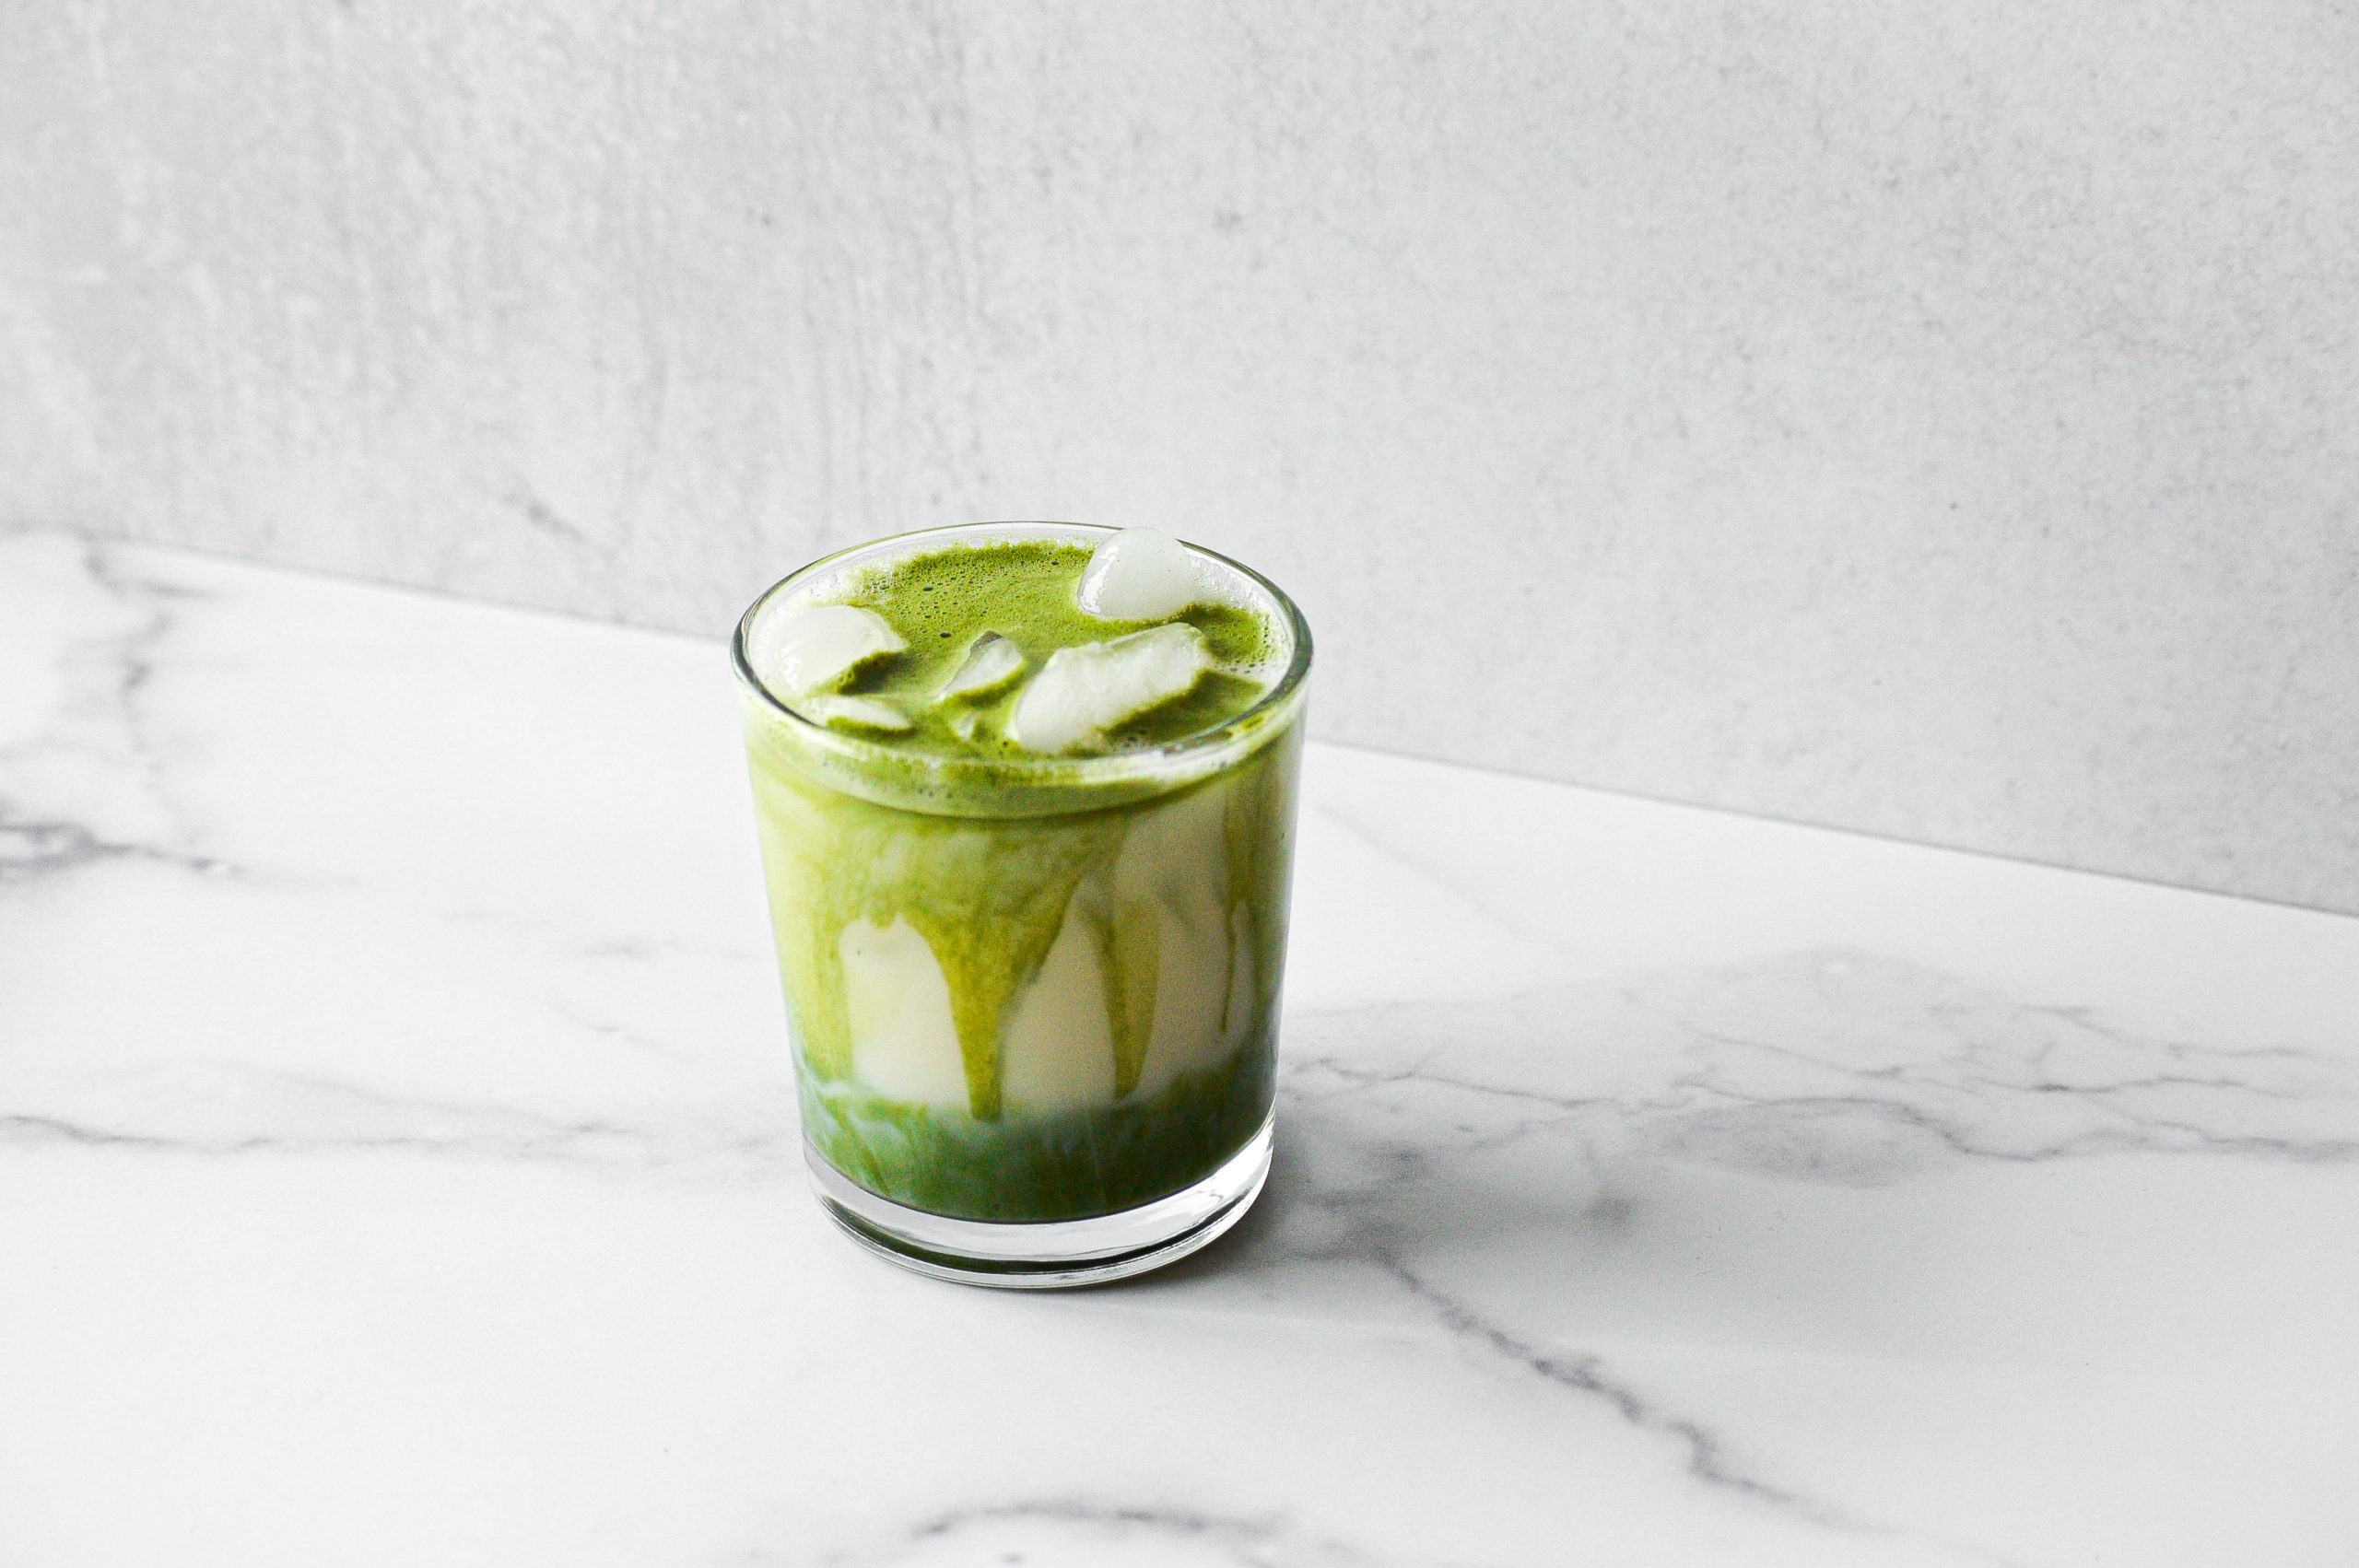 Iced matcha latte with marble and concrete background.